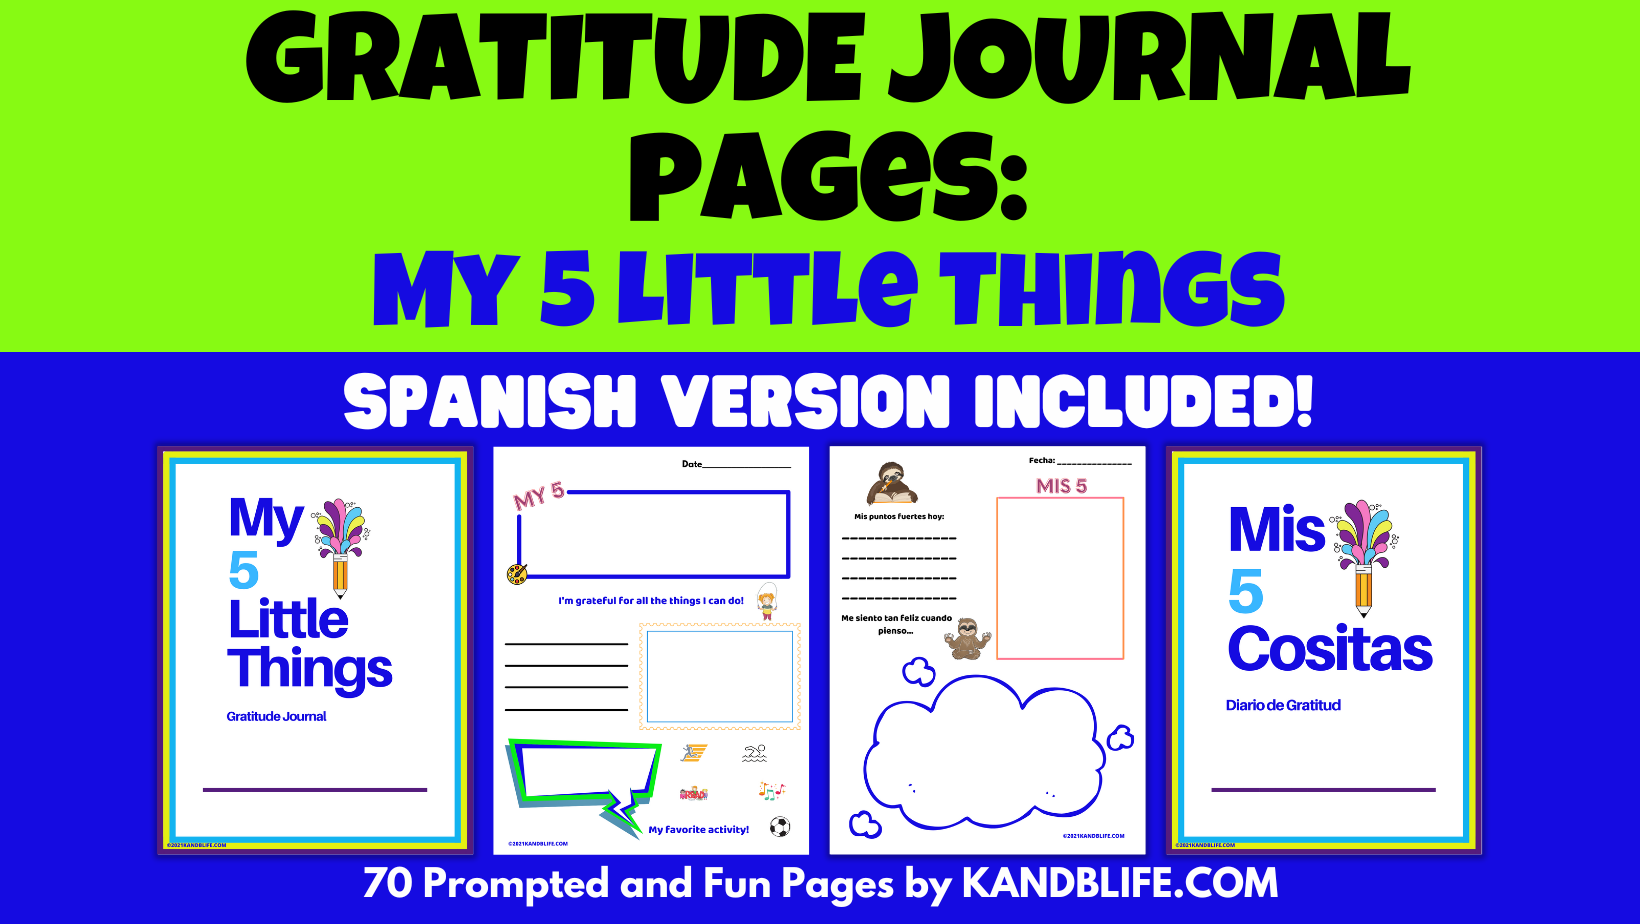 My 5 Little Things Printable Gratitude Journal Facebook cover.